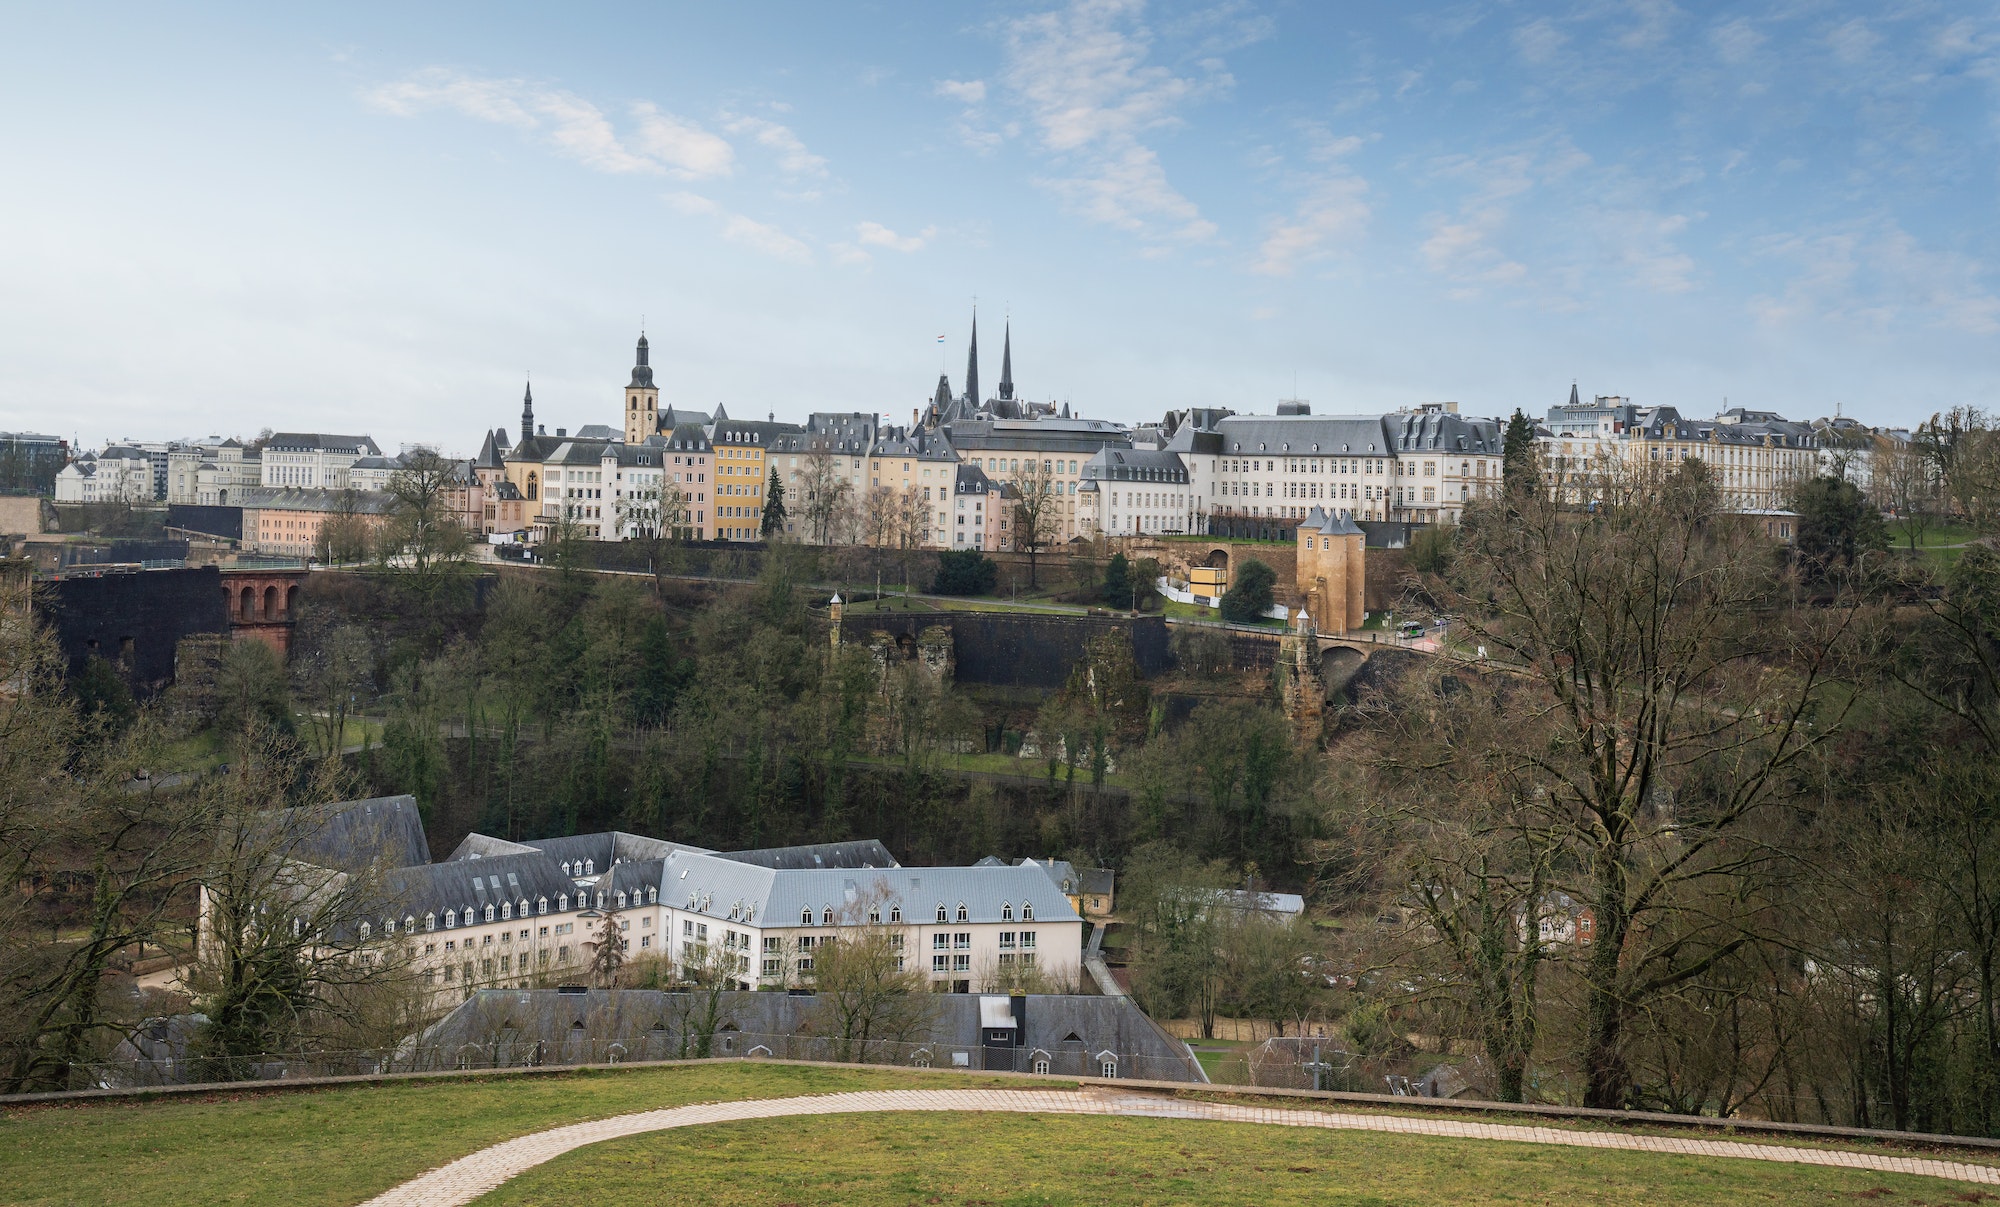 Luxembourg City skyline with Saint Michael's Church and old Walls - Luxembourg City, Luxembourg